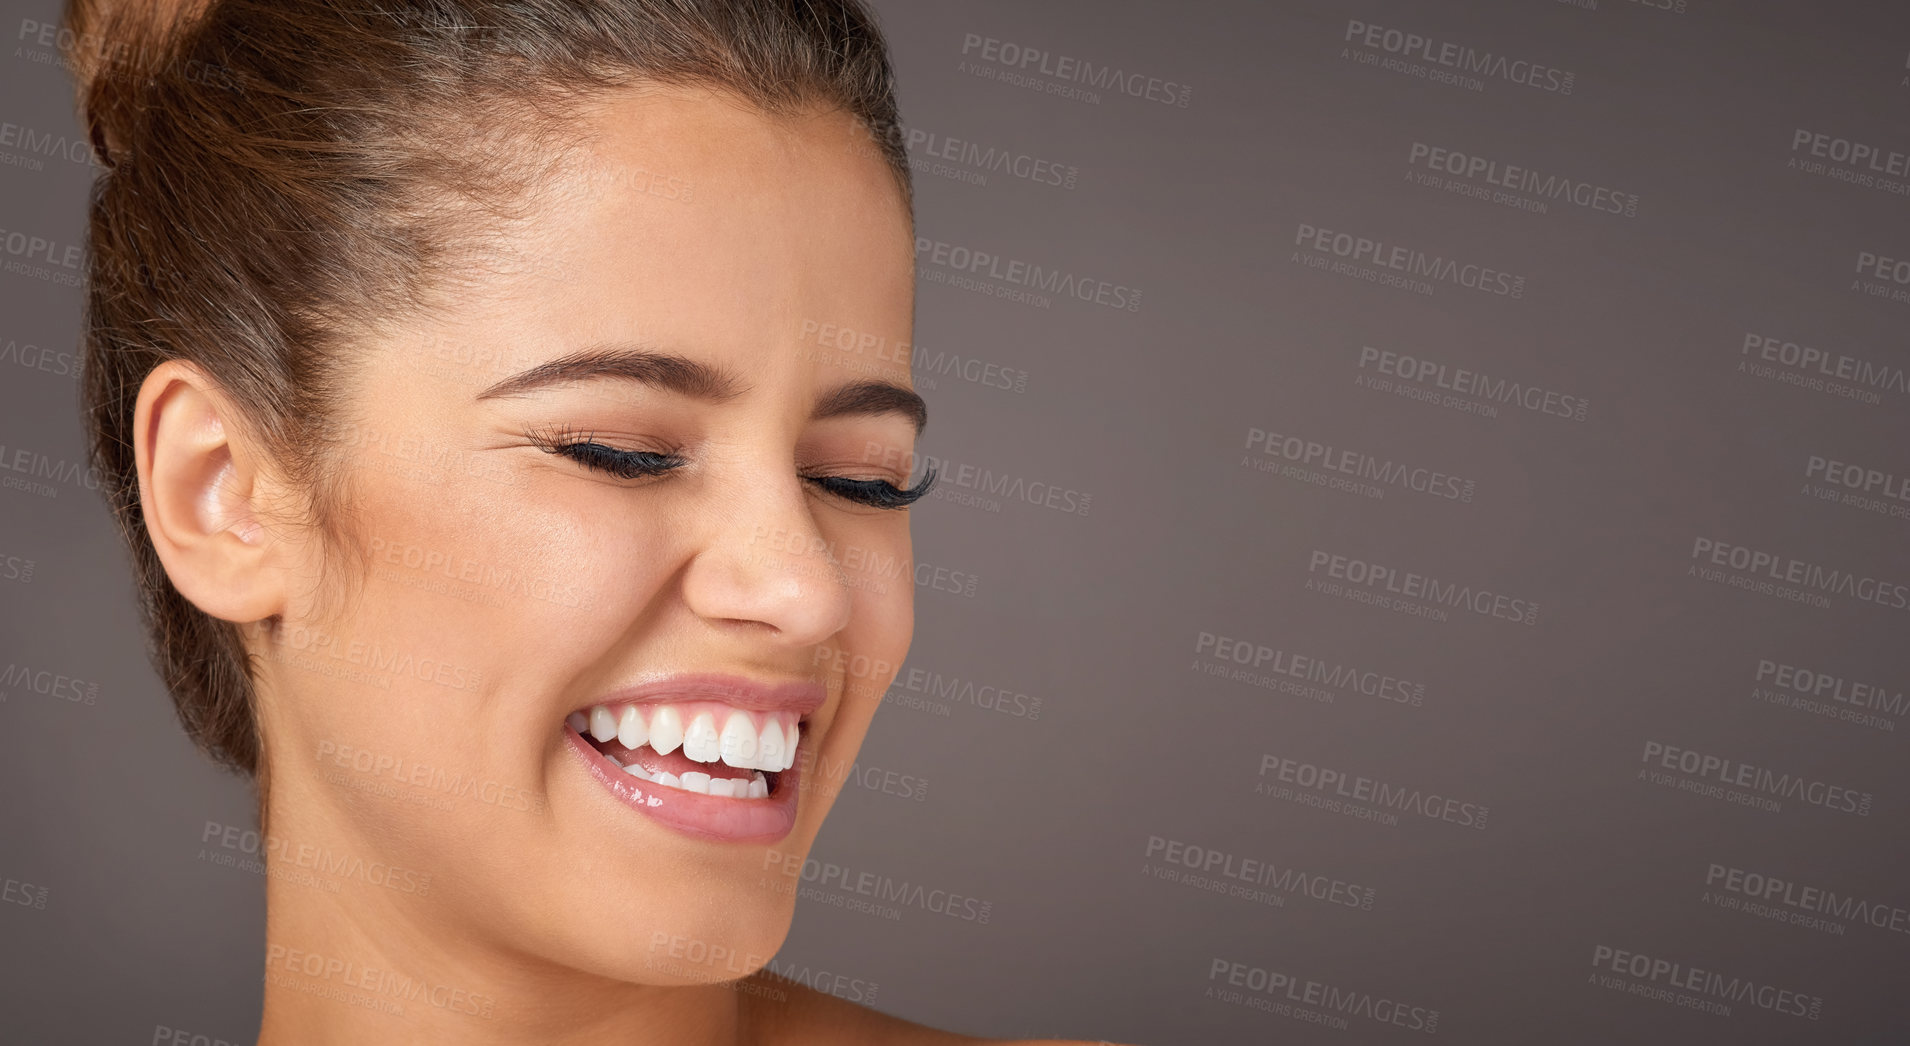 Buy stock photo Studio shot of a beautiful young woman laughing against a gray background